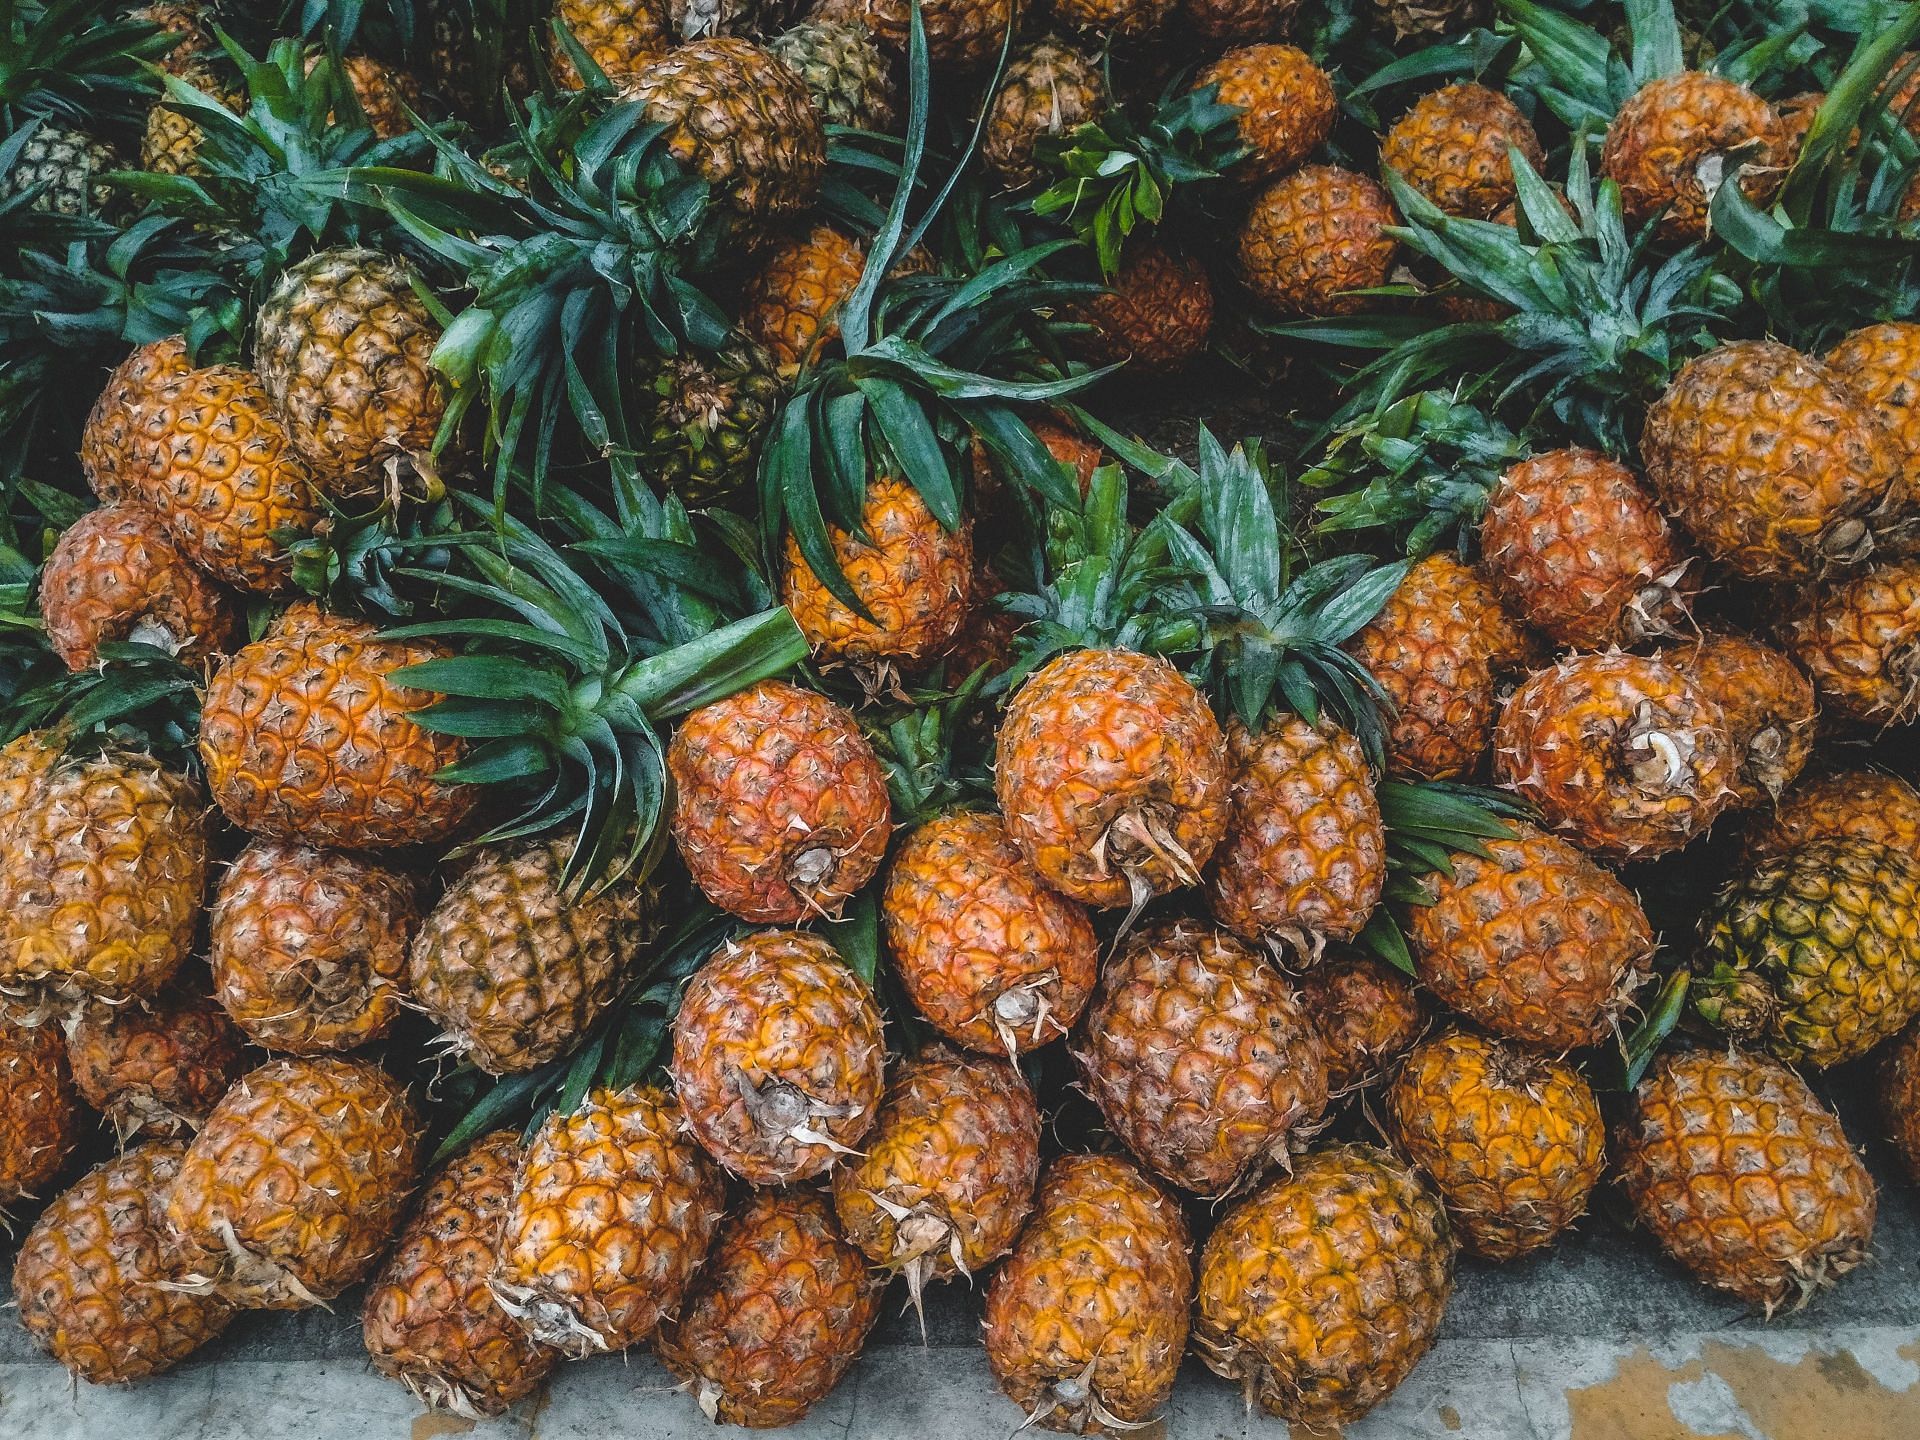 Pineapples are rich in digestive enzymes which help maintain optimal stomach health (Image via Pexels)